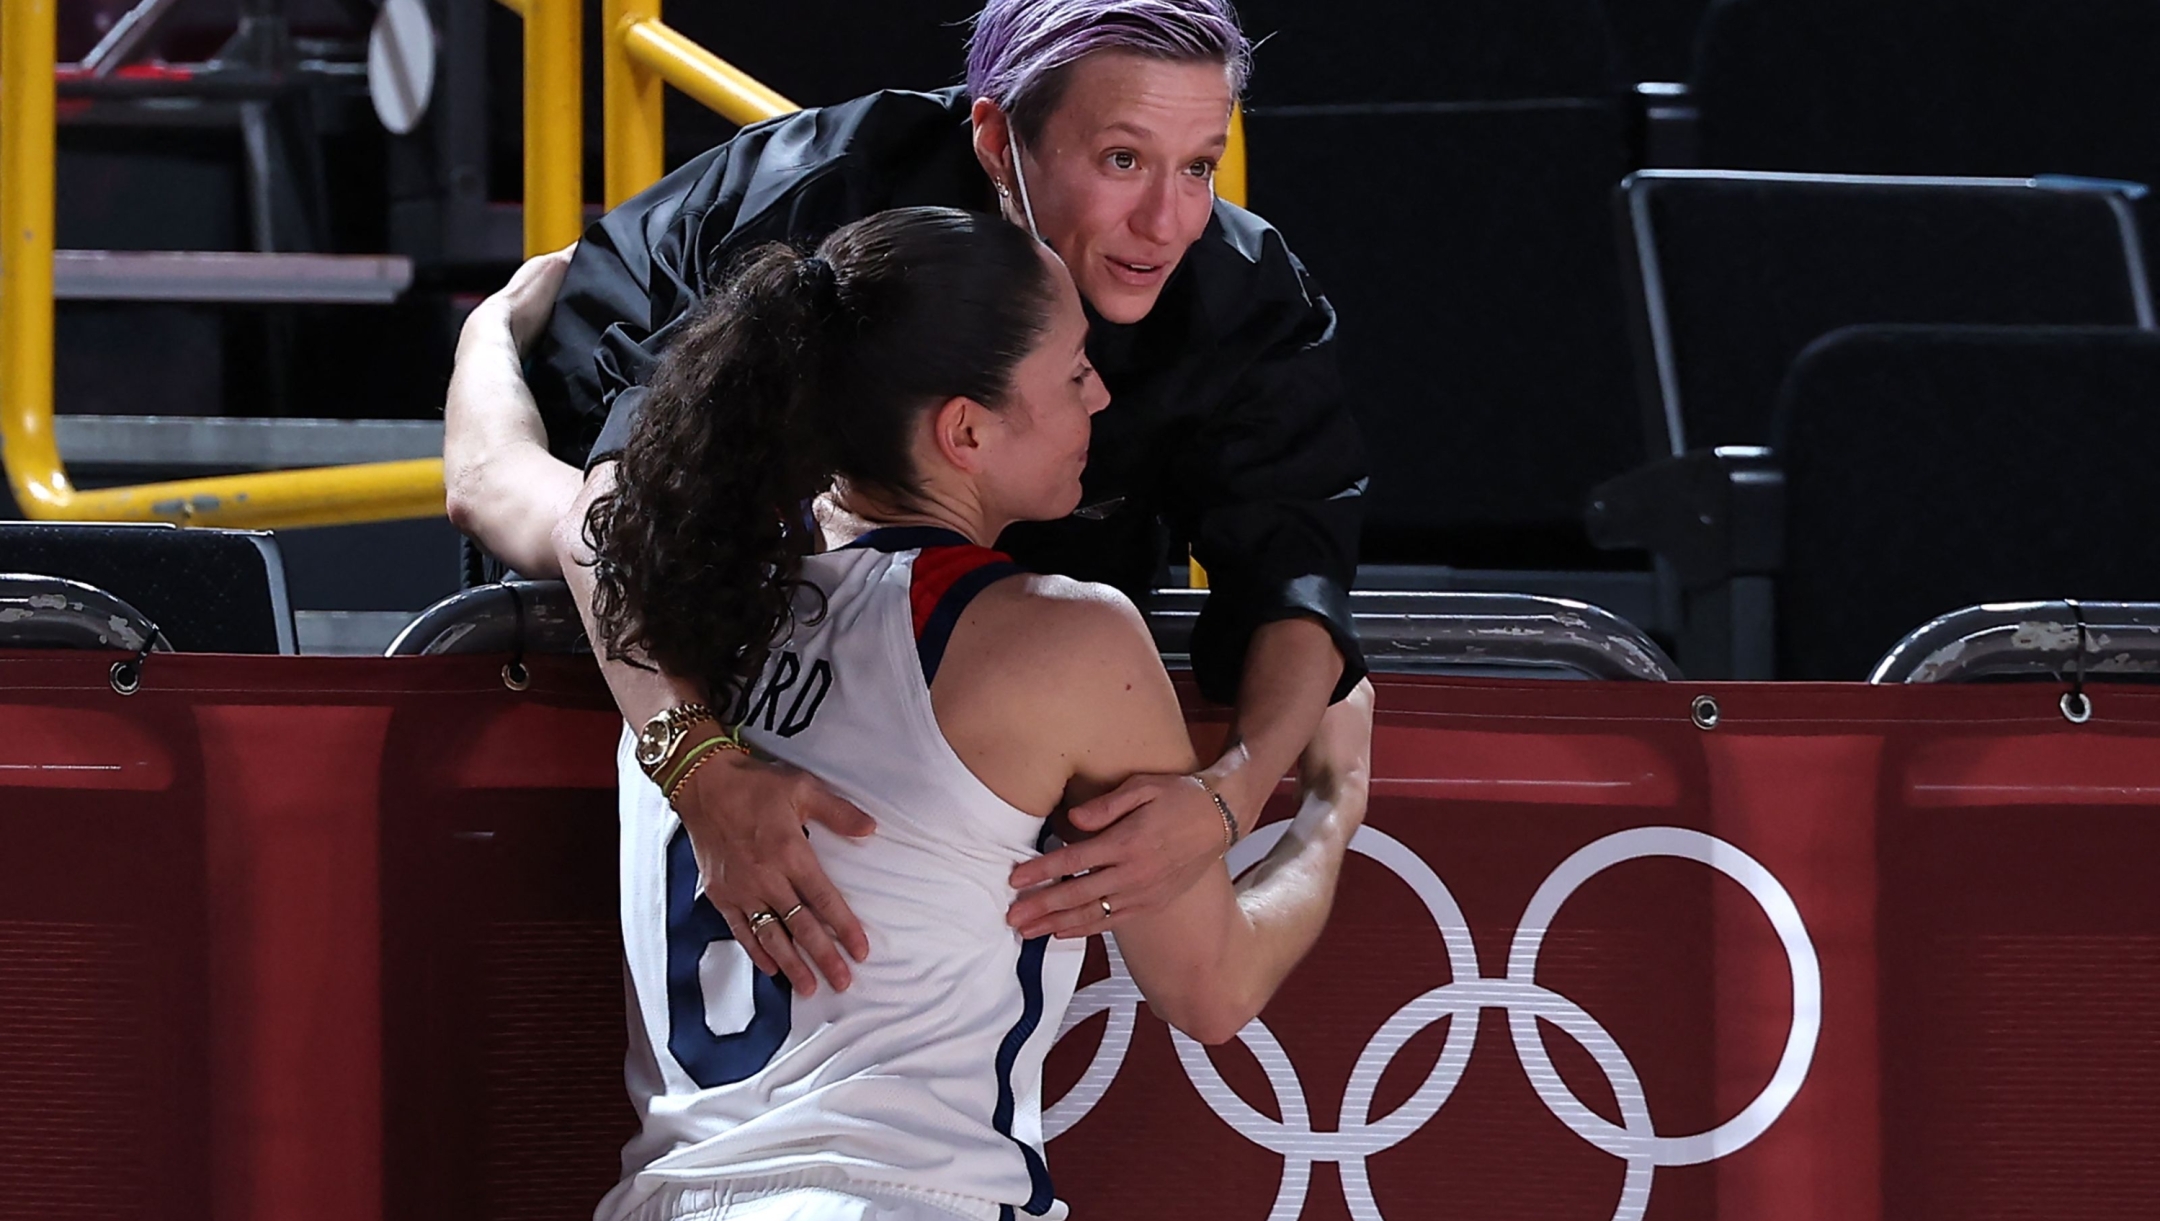 USA's football player Megan Rapinoe (R) greets USA's Sue Bird after the women's final basketball match between USA and Japan during the Tokyo 2020 Olympic Games at the Saitama Super Arena in Saitama on August 8, 2021. (Photo by Thomas COEX / AFP)